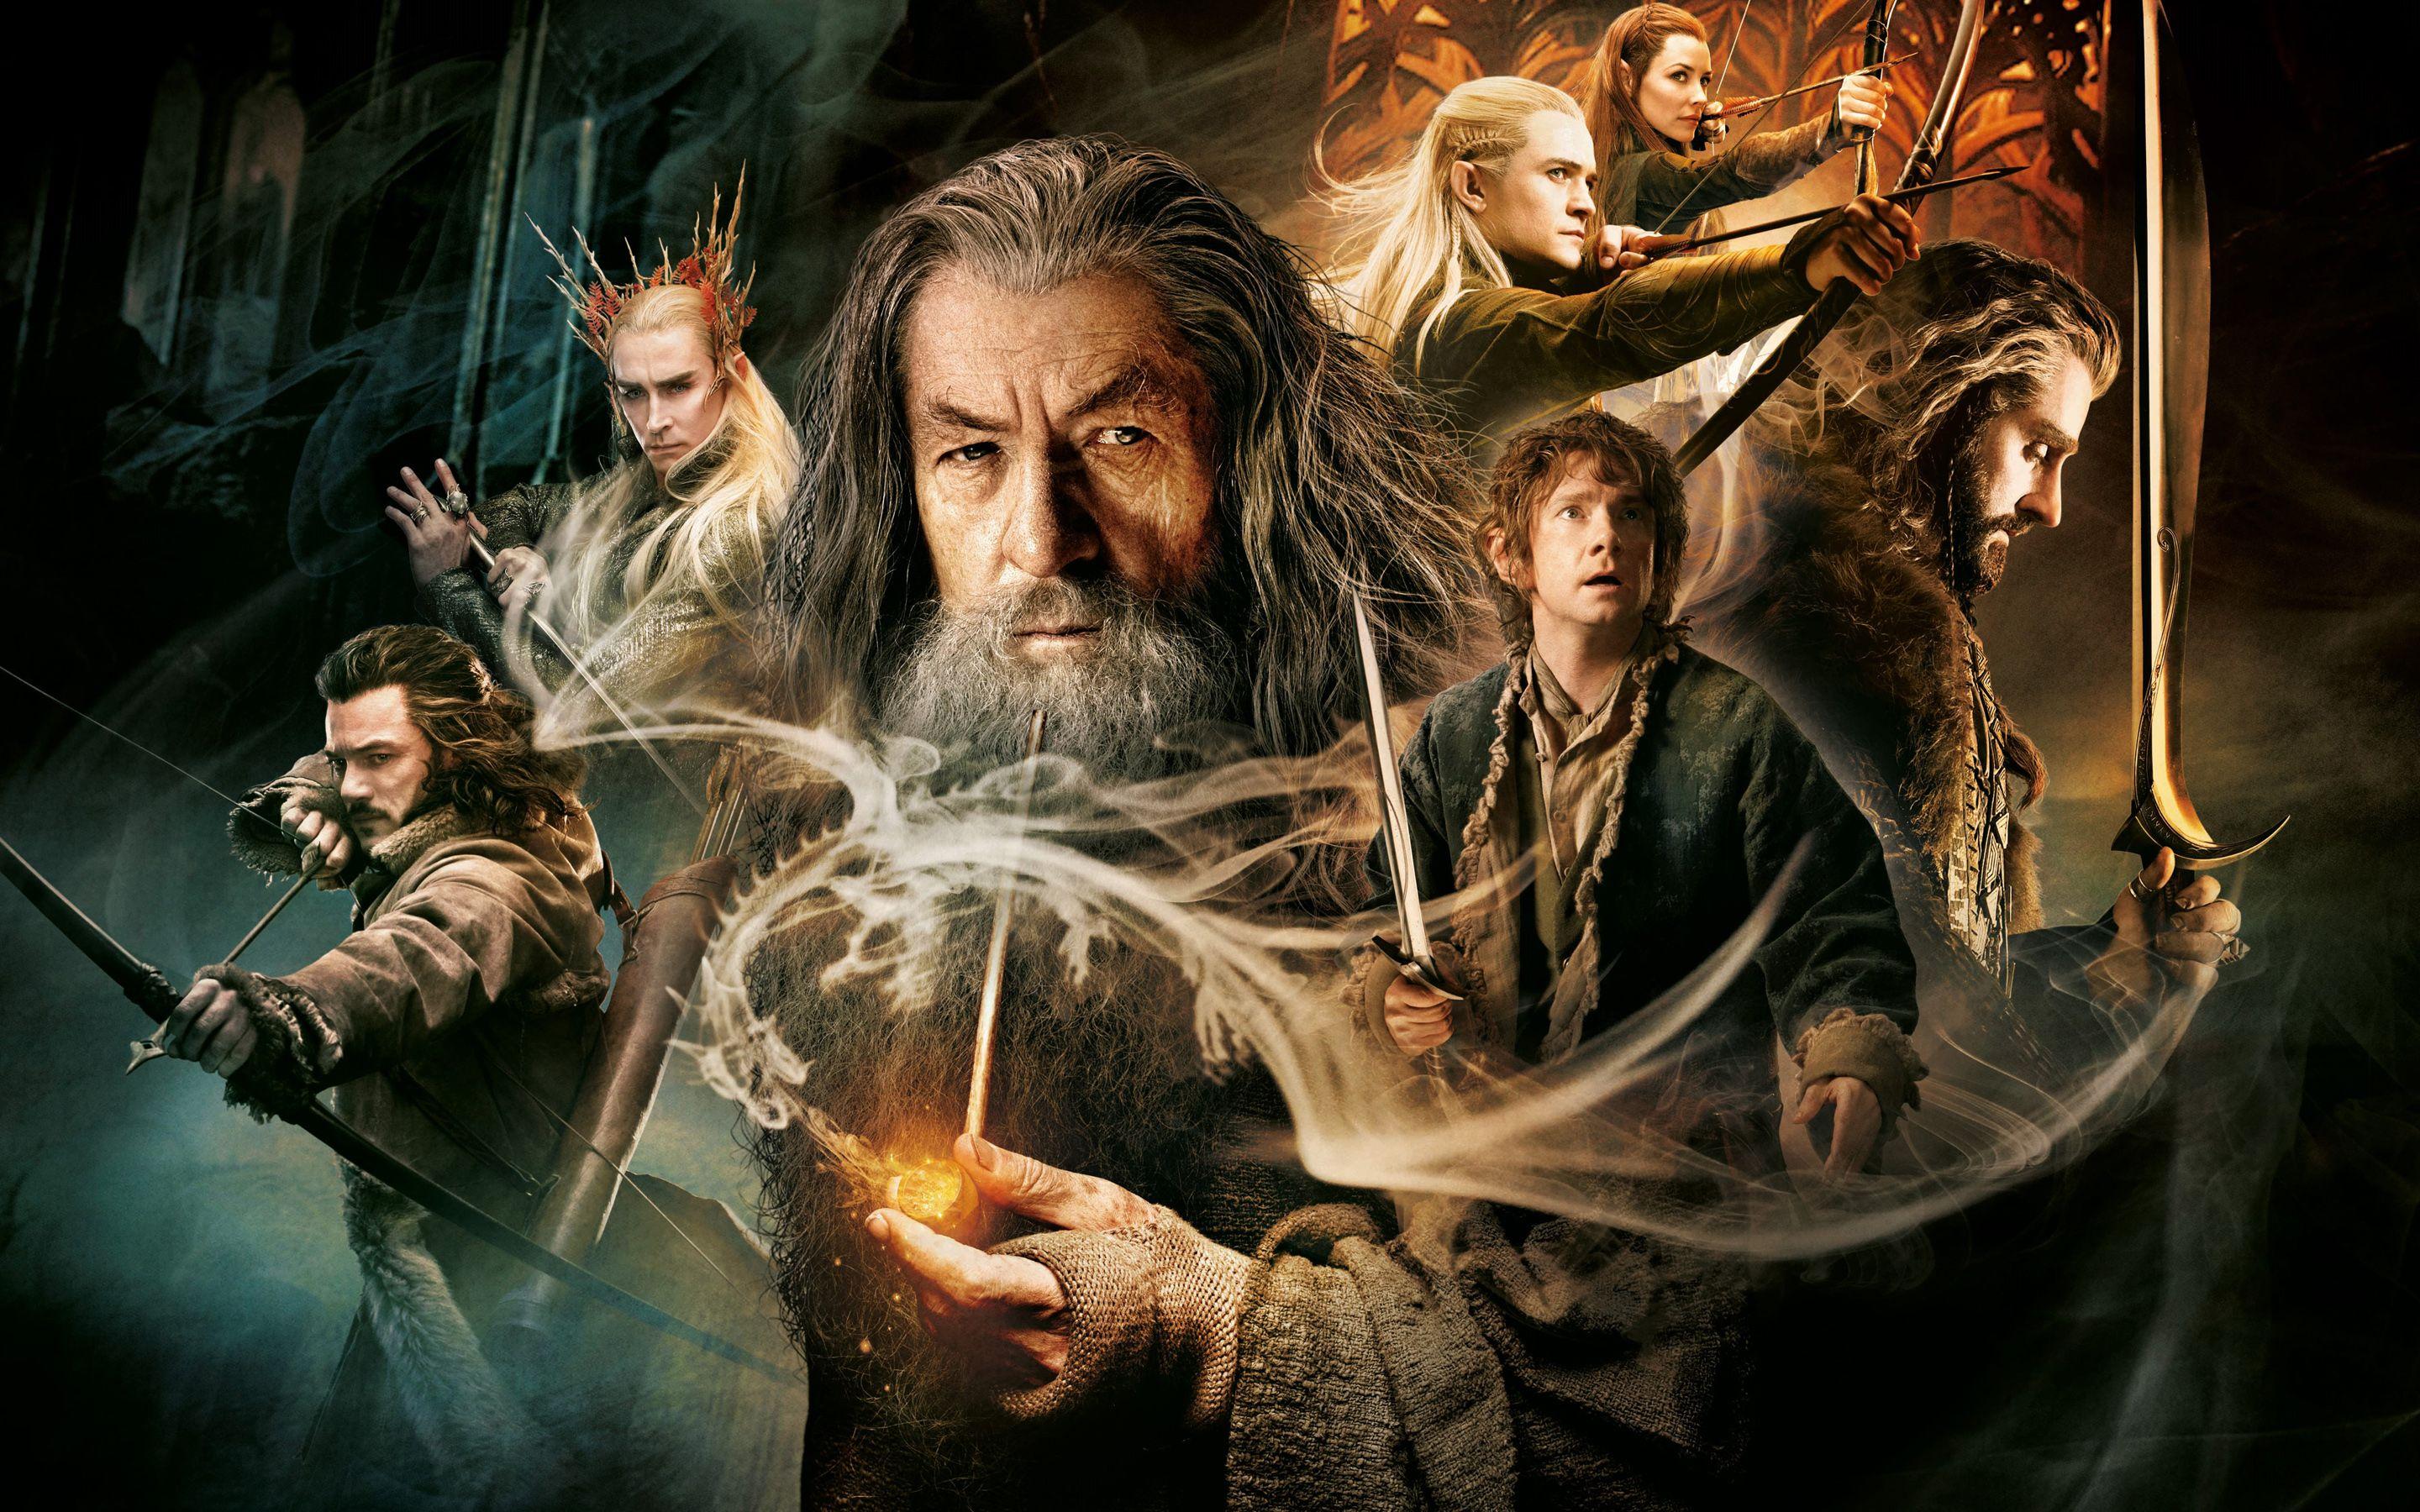 Watch A New Clip From 'The Hobbit: Desolation of Smaug' Extended